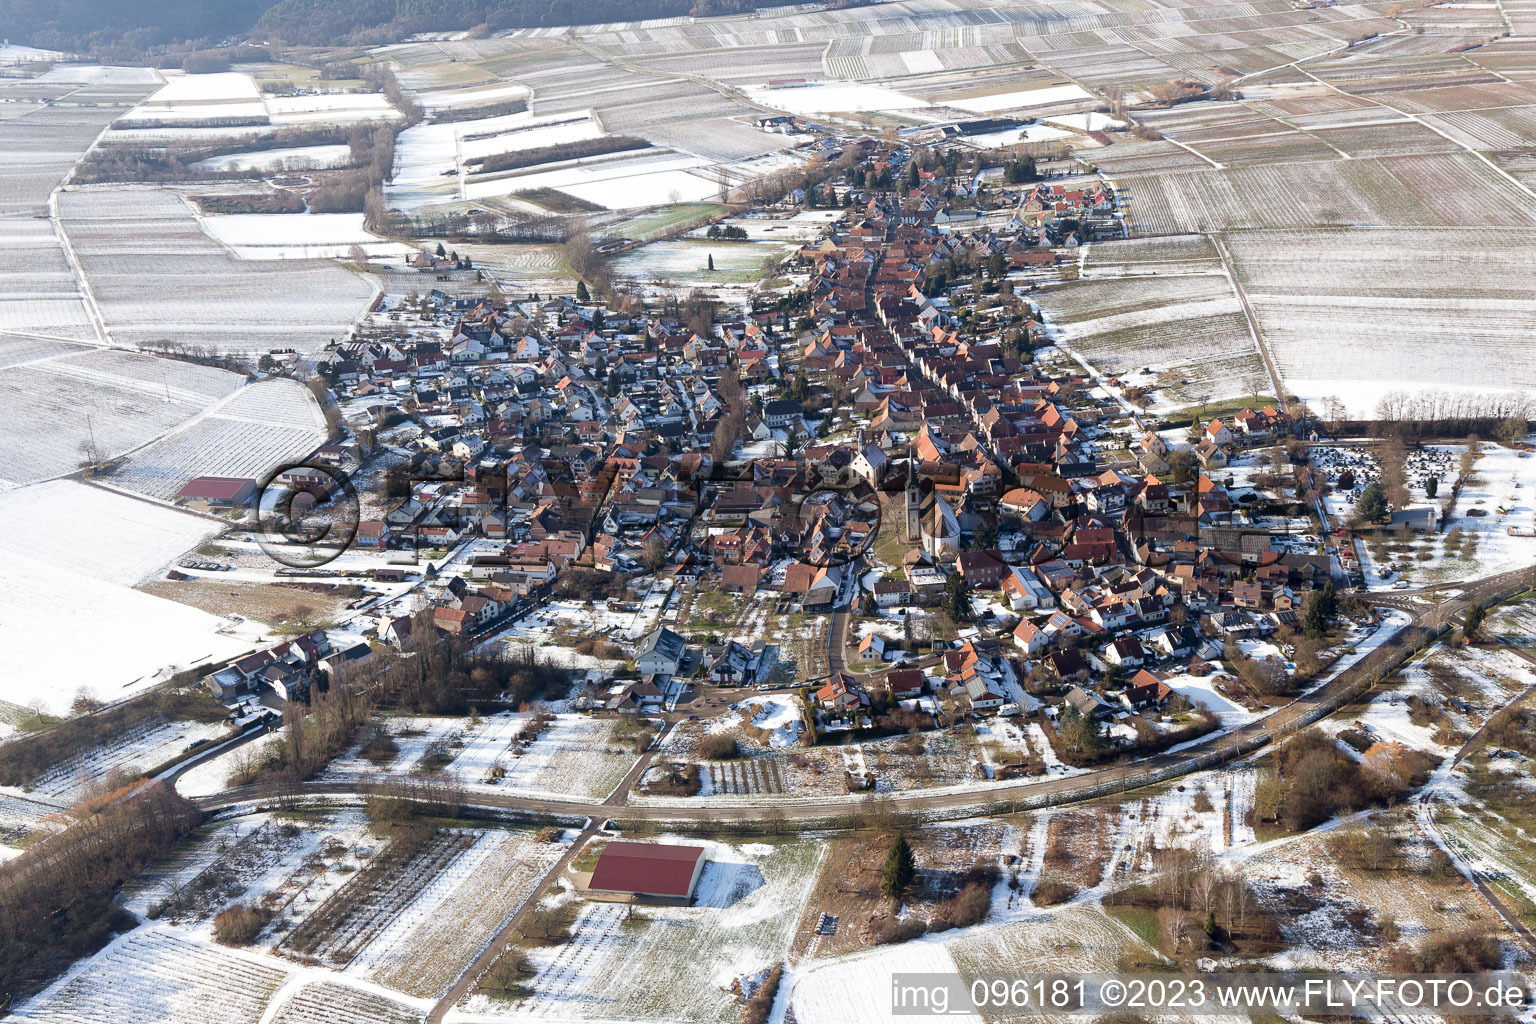 Göcklingen in the state Rhineland-Palatinate, Germany seen from above